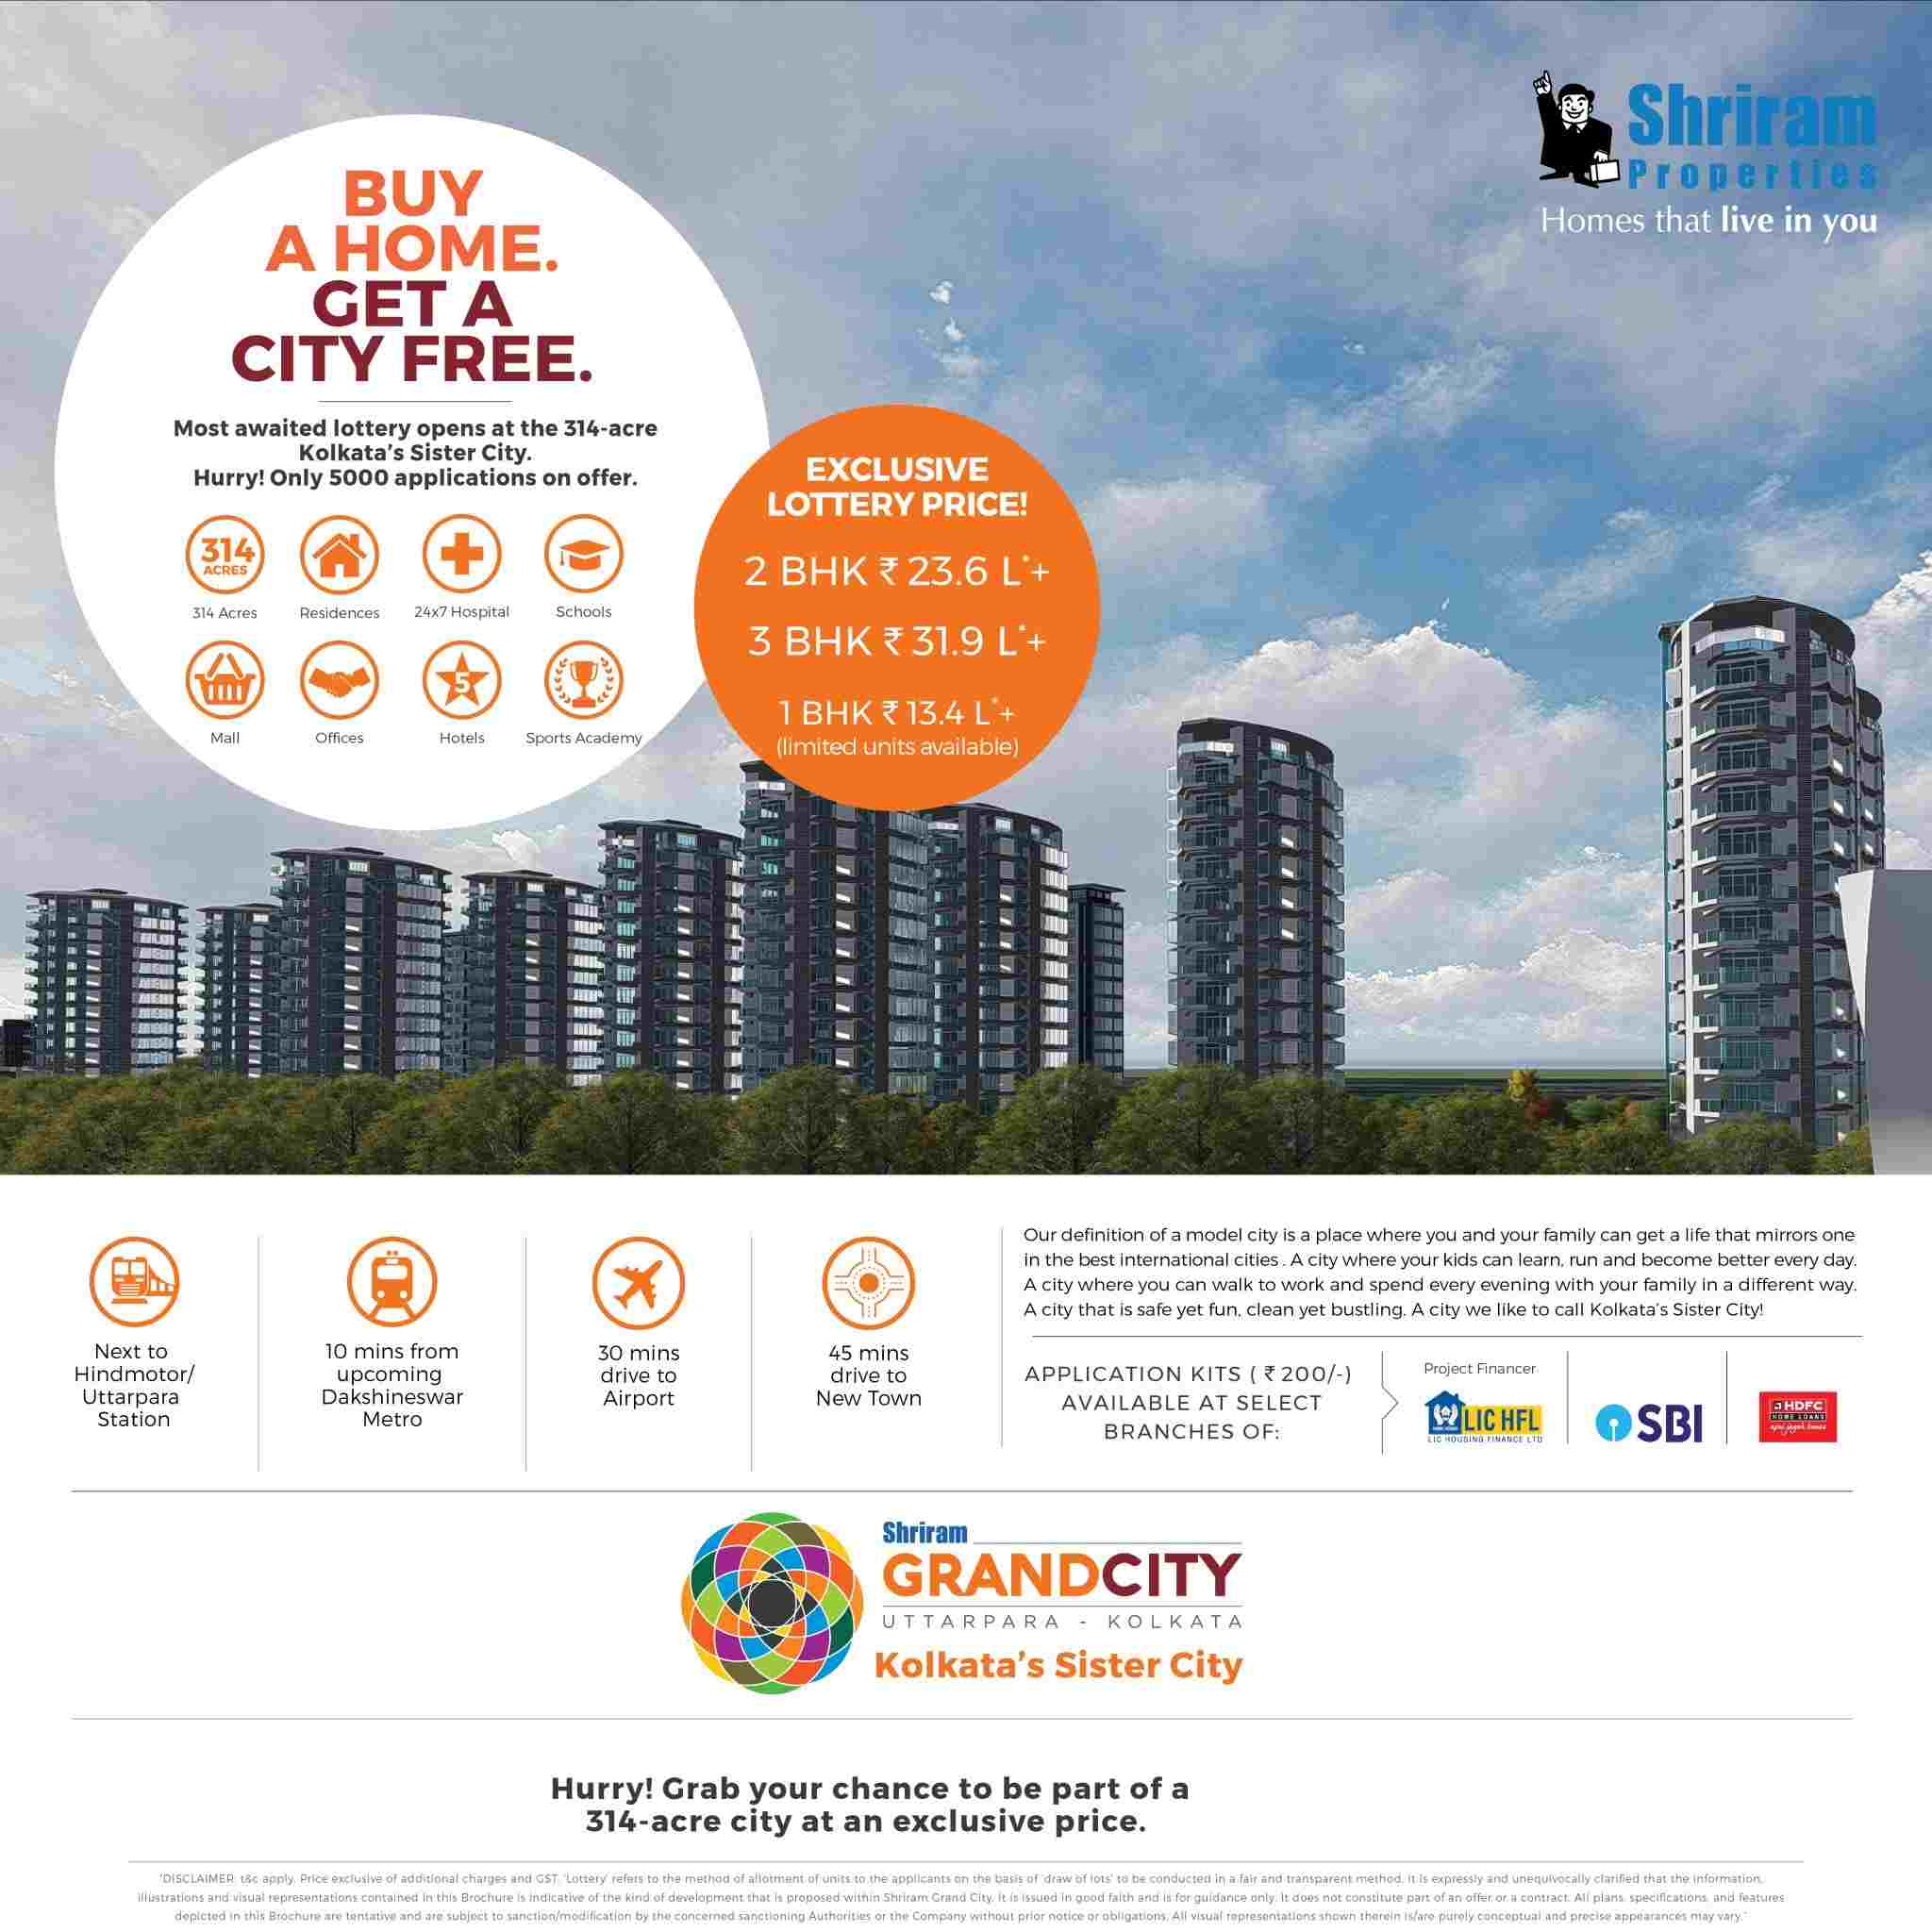 Grab your chance to be part of 314-acre city with exclusive price at Shriram Grand City in Kolkata